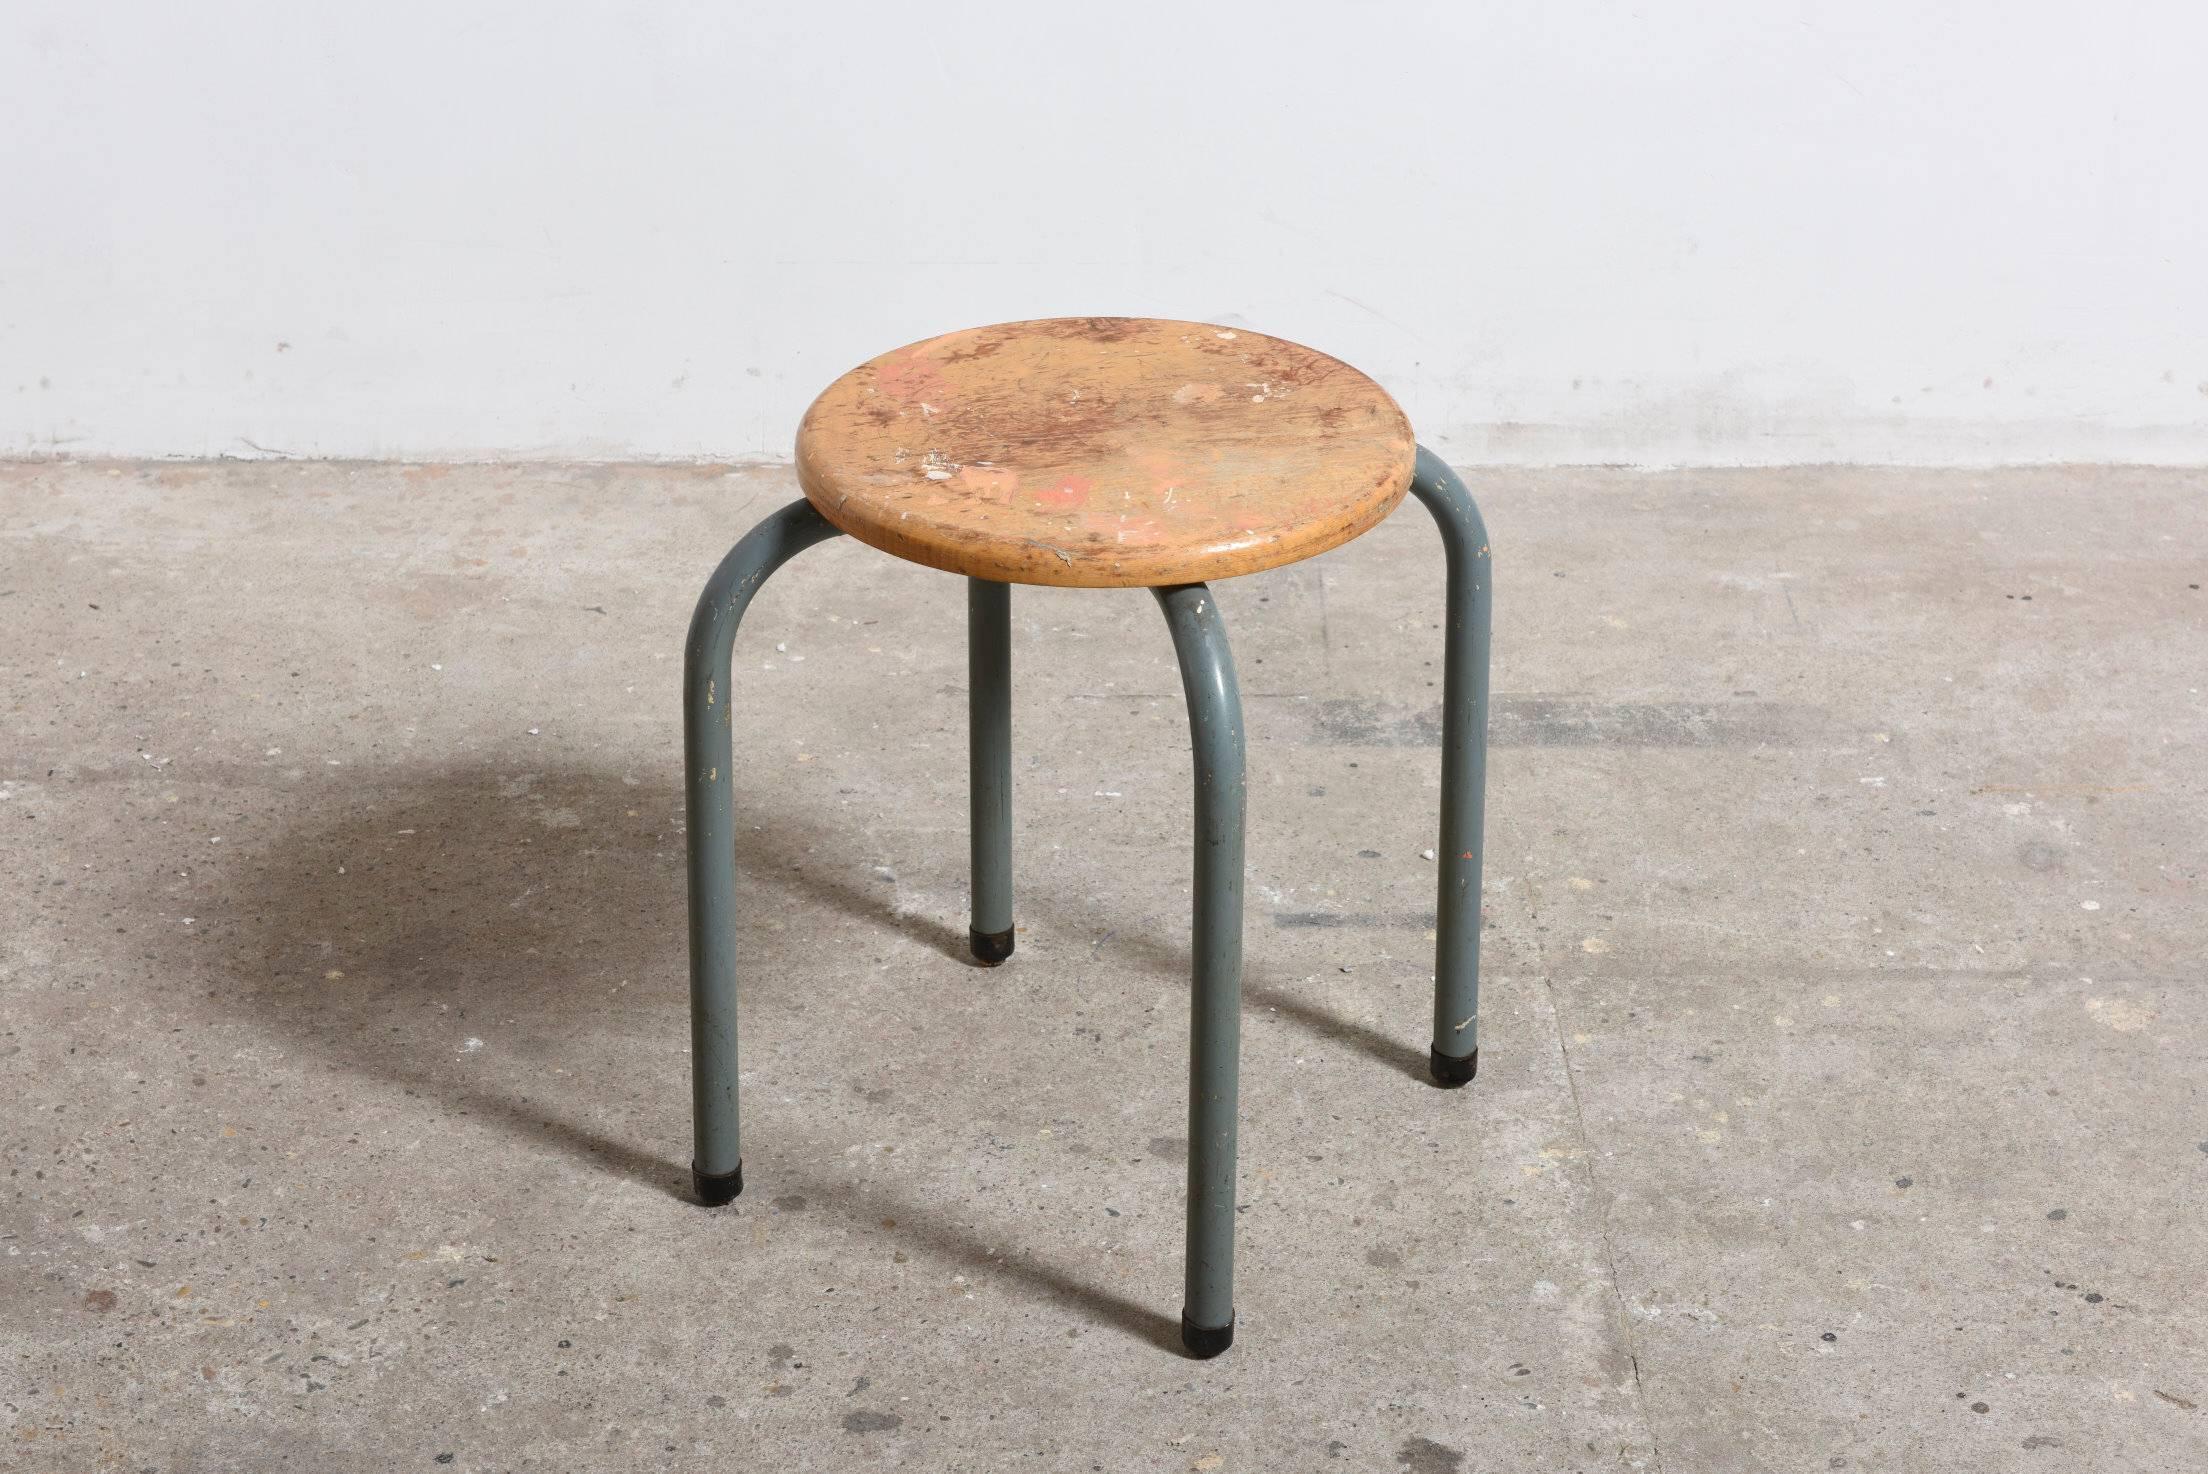 This set of stools from an artist's studio are practical in use with an characteristic Industrial look made by Tubax, Belgium.

Stools with a grey lacquered tubular metal frame and a round birch plywood seat. 
The stools are stackable and we have